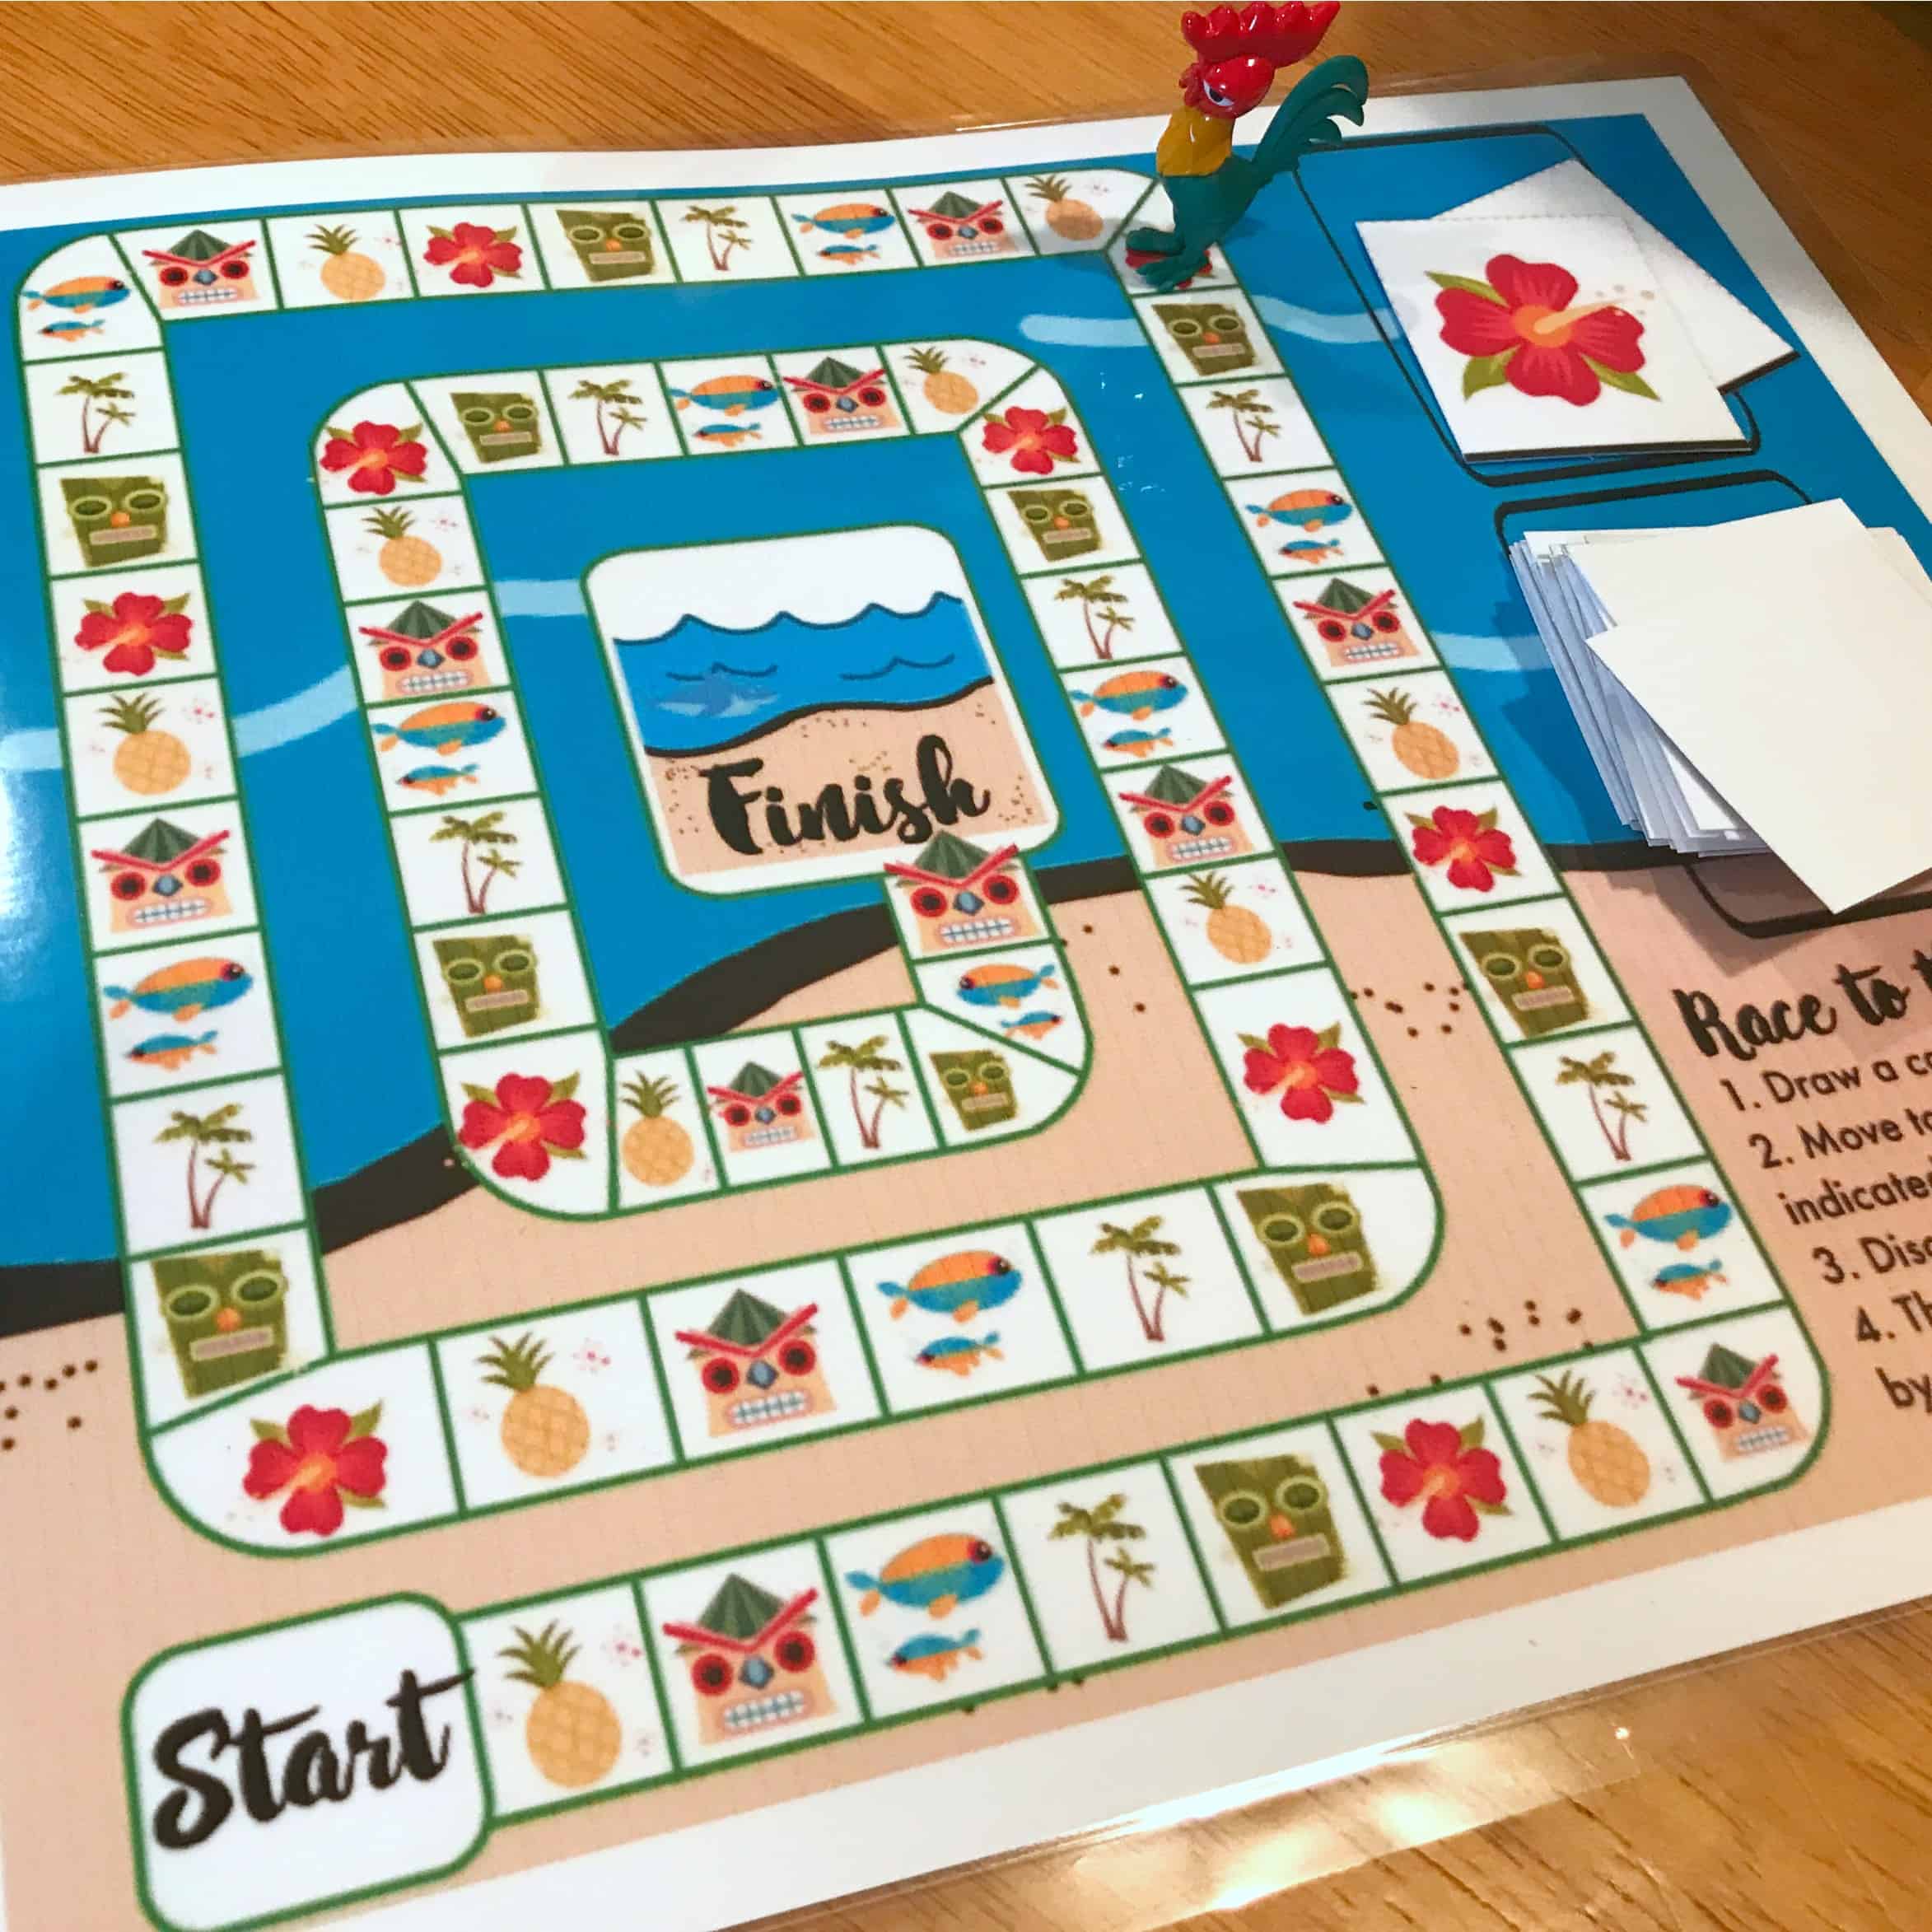 This Moana-inspired Island printable board game is a great freebie to use with preschool and up. Race to the Ocean in this fun game!